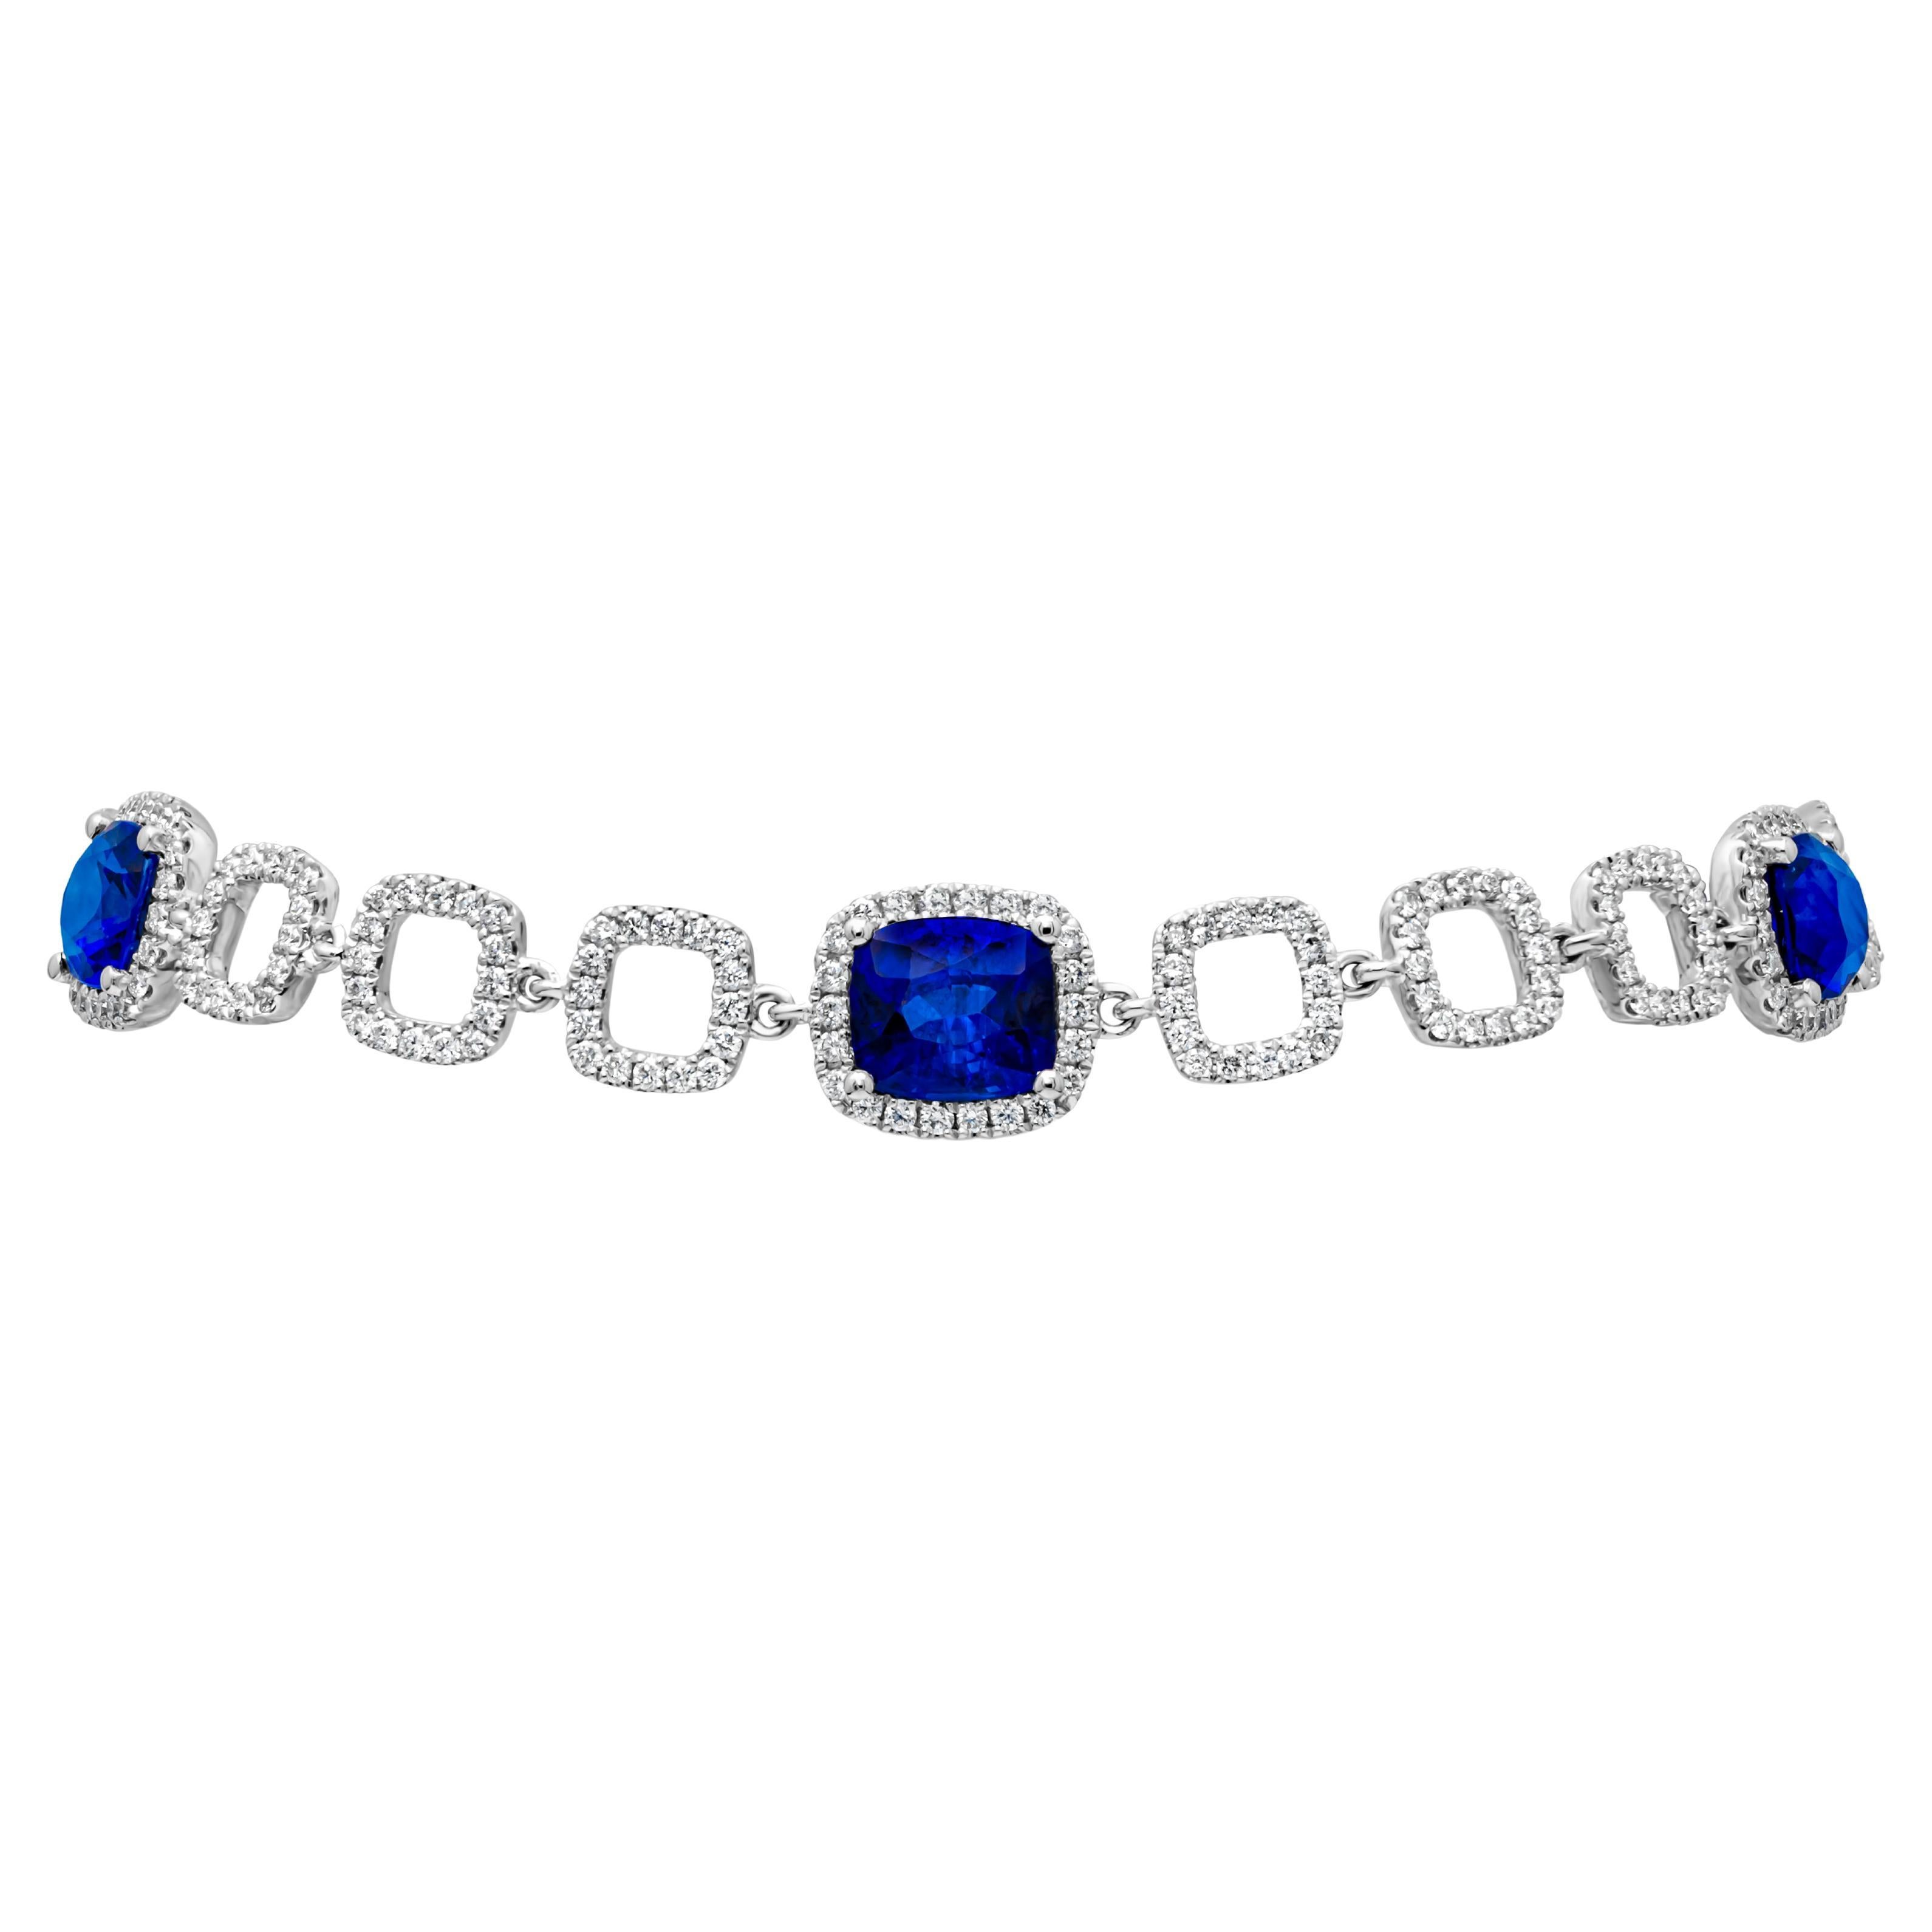 A fashionable and stunning tennis bracelet showcasing a color-rich 5 cushion cut blue sapphires weighing 5.09 carats total, set in a classic four prong basket setting and surrounded by brilliant round cut melee diamonds in a halo design. Elegantly